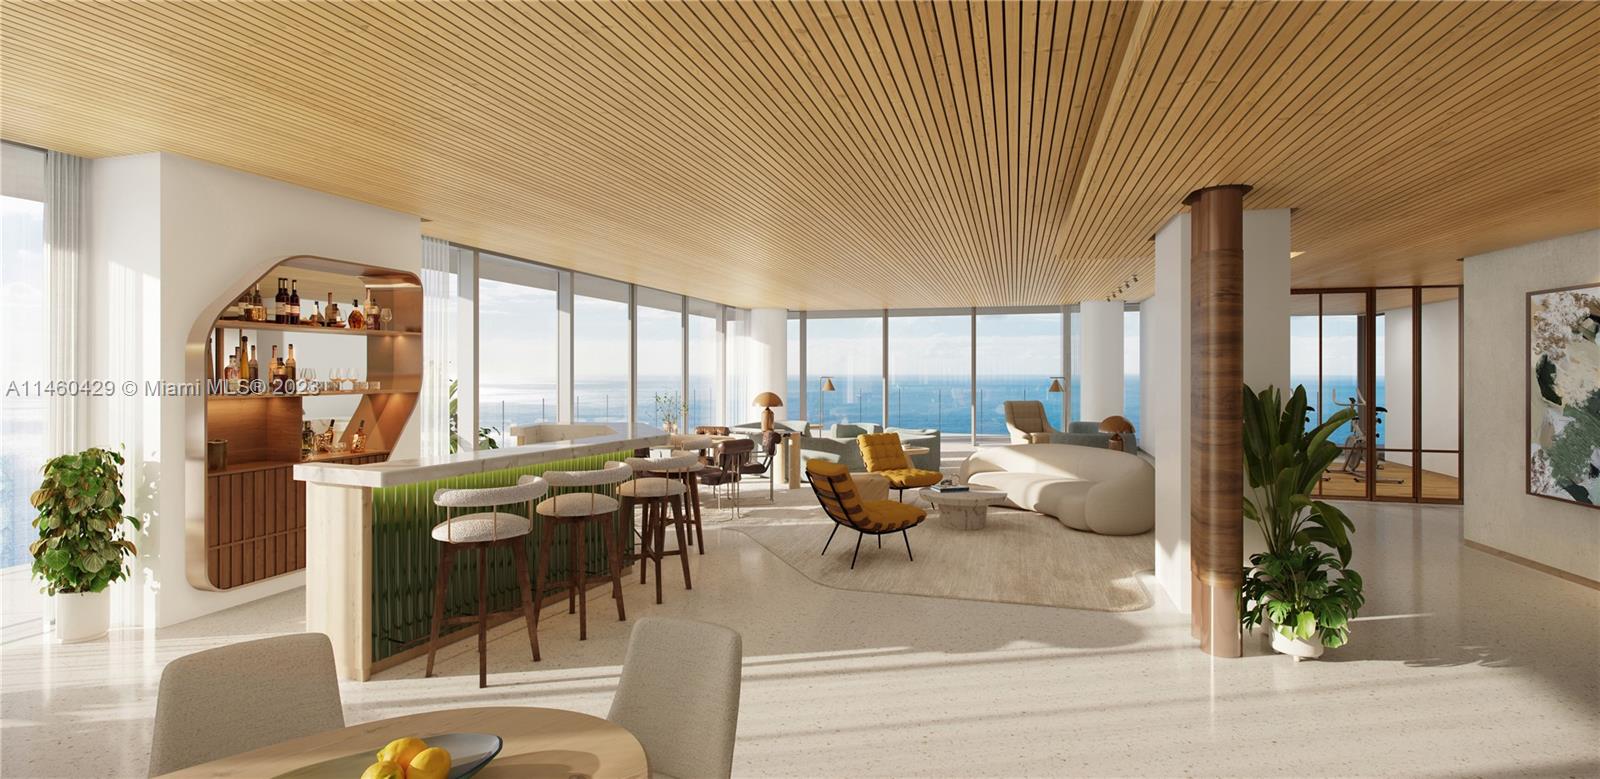 Rare opportunity in Bal Harbour’s most coveted building to customize a one-of-a-kind direct oceanfront residence in the sky. Expansive corner unit complete with APPROVED plans and permits for a spacious 7,442sqft space that feels like a single-family home, featuring 4-bedrooms with private gym, office, entertaining bar, plus 2 additional staff rooms. Floor to ceiling walls of glass open up to an incredible wraparound terrace showcasing over 2,300sqft of outdoor space overlooking unobstructed views of the ocean and bay. The possibilities are boundless, with Oceana residents gaining access to unrivaled amenities and community including concierge beach service, resort style pool, spa, tennis, restaurant, 24/7 concierge and security – all within reach of the best dining, shopping, top schools.